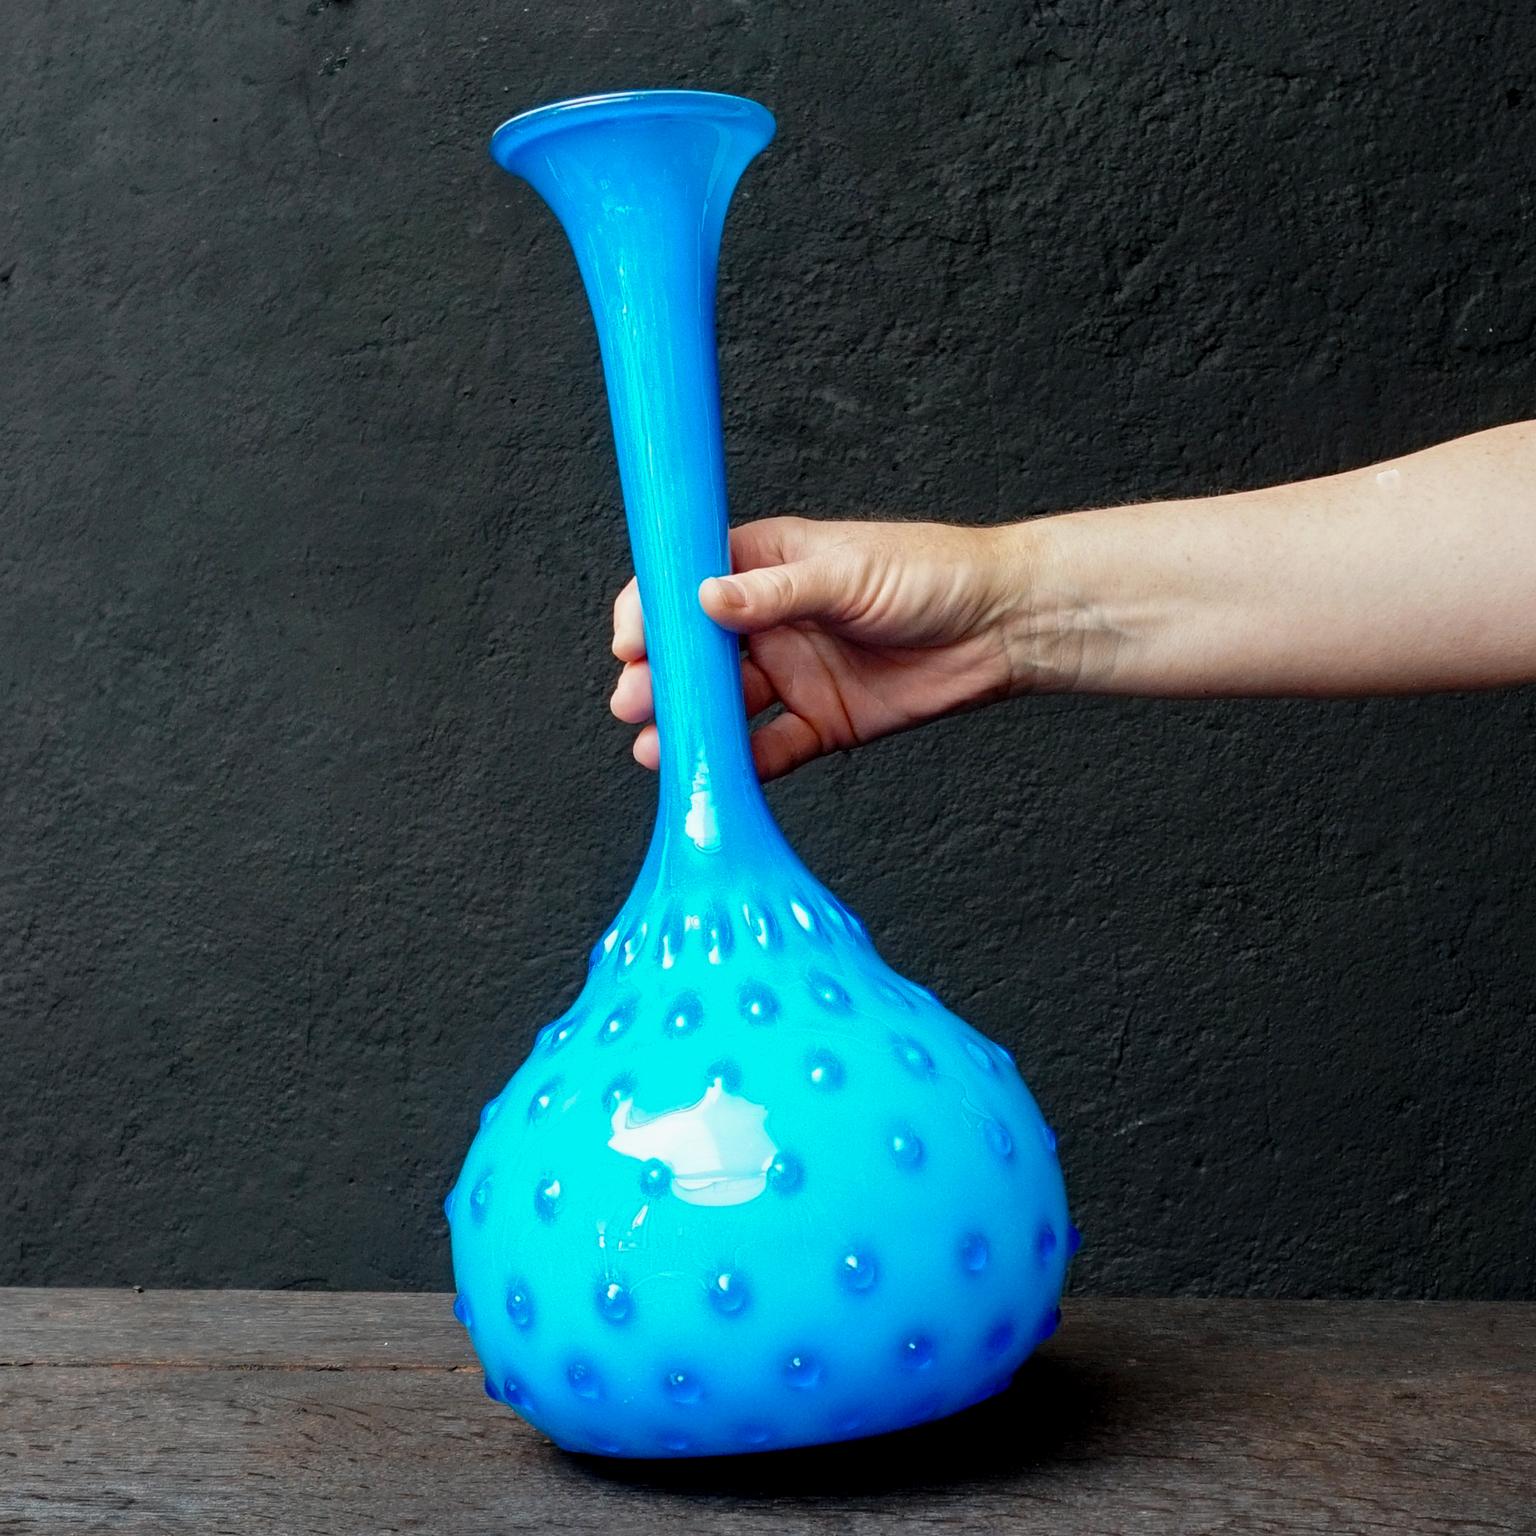 What an eye-catcher this Mid-Century Modern 1950s Italian Empoli bright blue cased art glass vase is.
It is handblown by glass craftsmen in Empoli, Florence, Italy.
During the glass blowing process the hobnail design is applied. 

This large